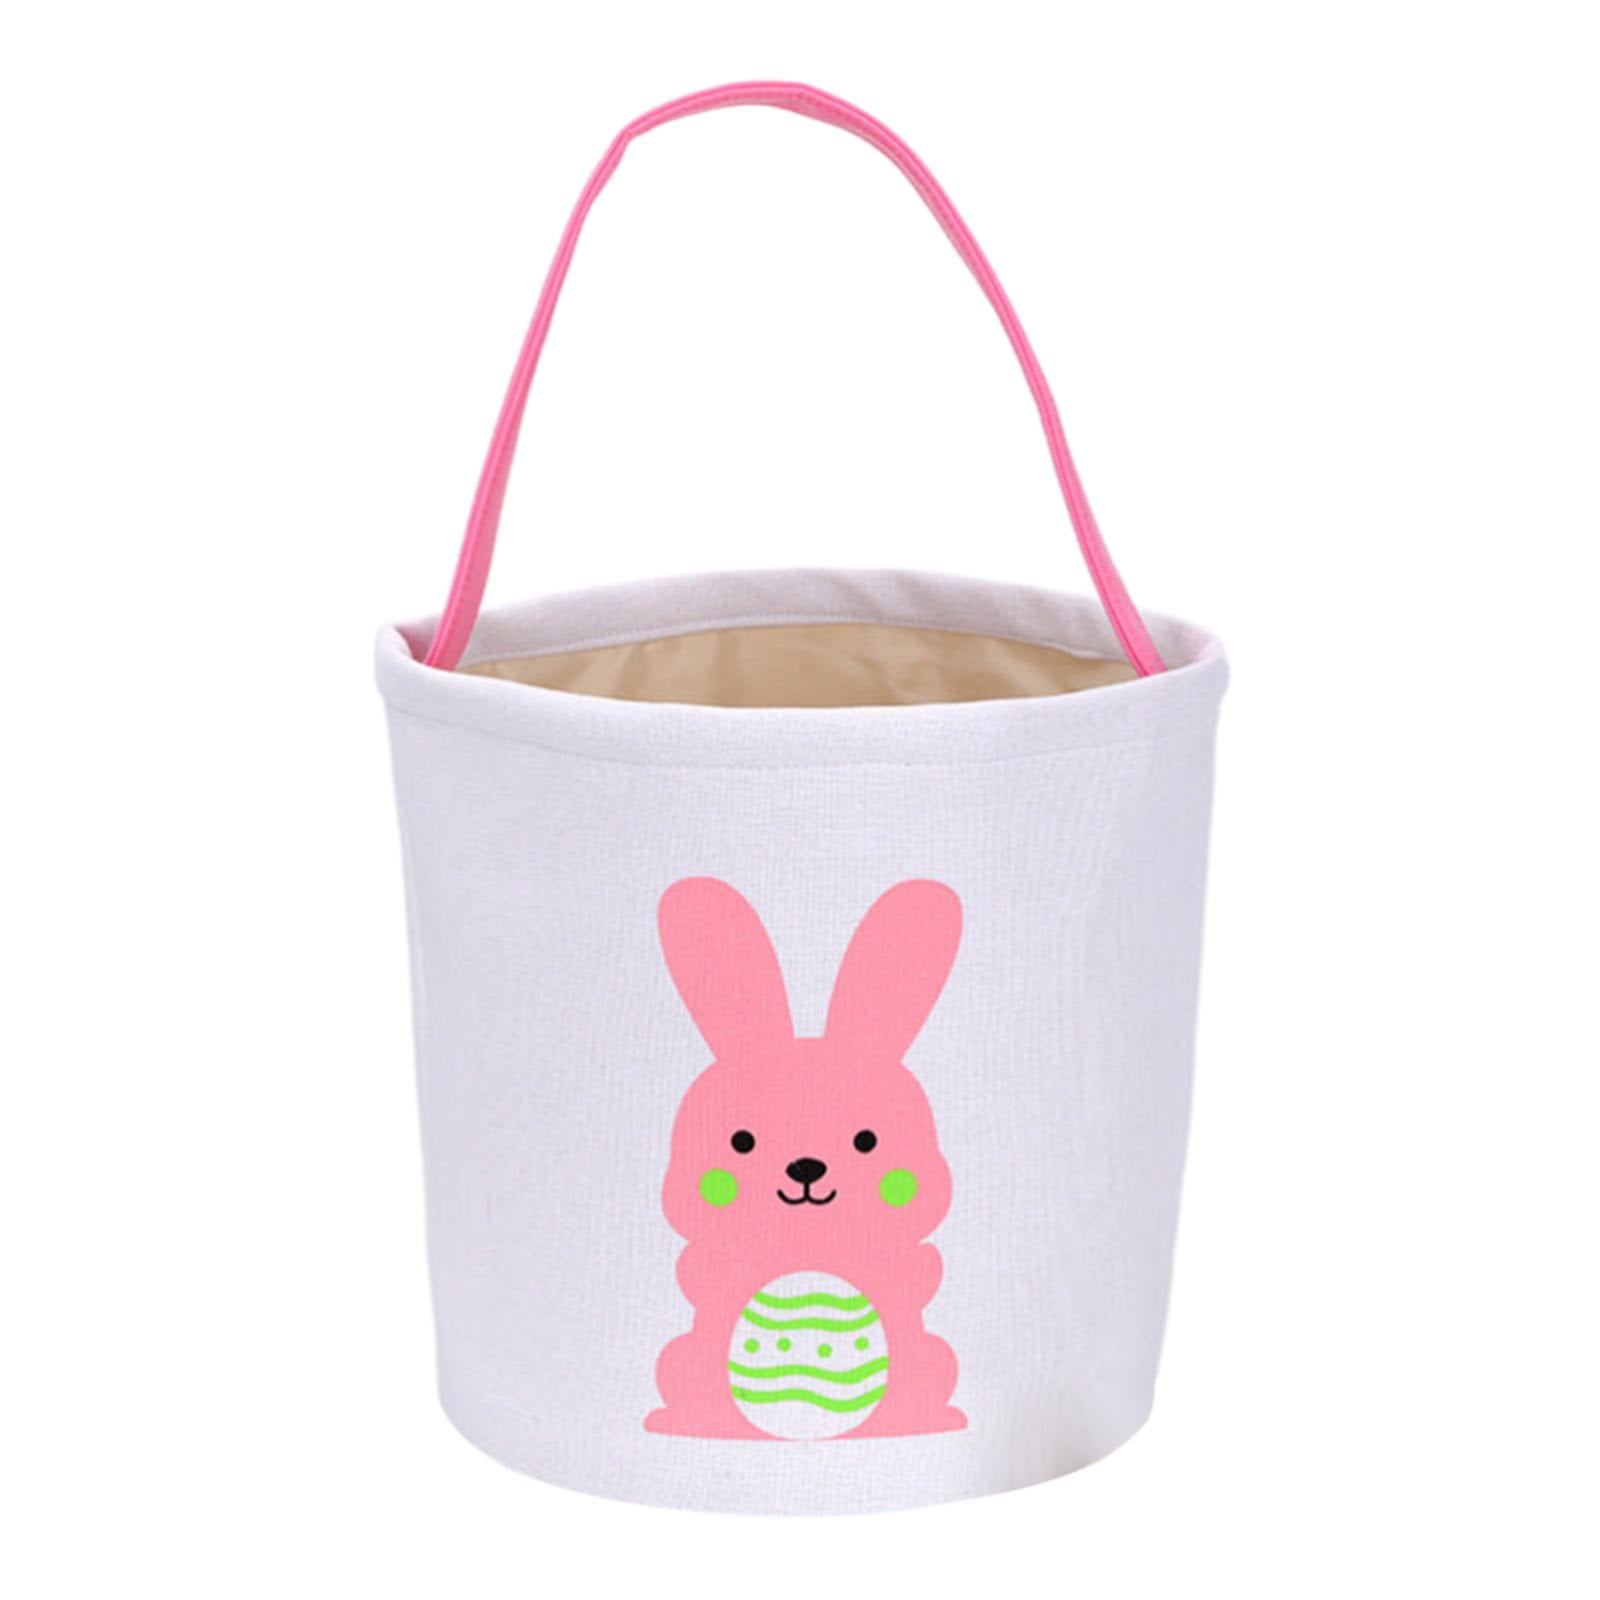 Wefuesd Easter Decorations Gift Animal Holiday Rabbit Cute Candy Canvas ...